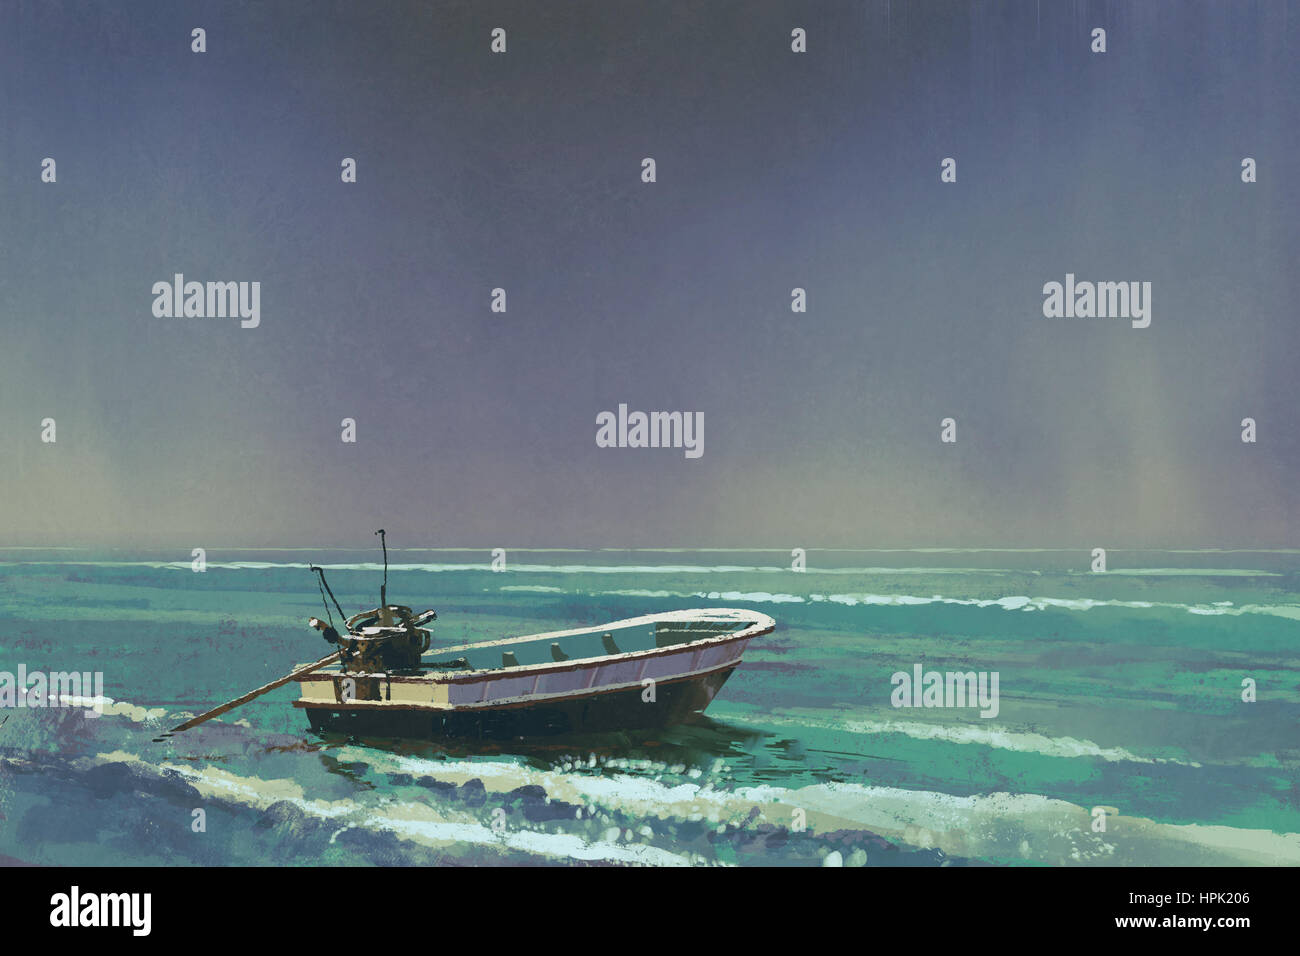 the boat on the sea with grey sky on background,illustration painting Stock Photo